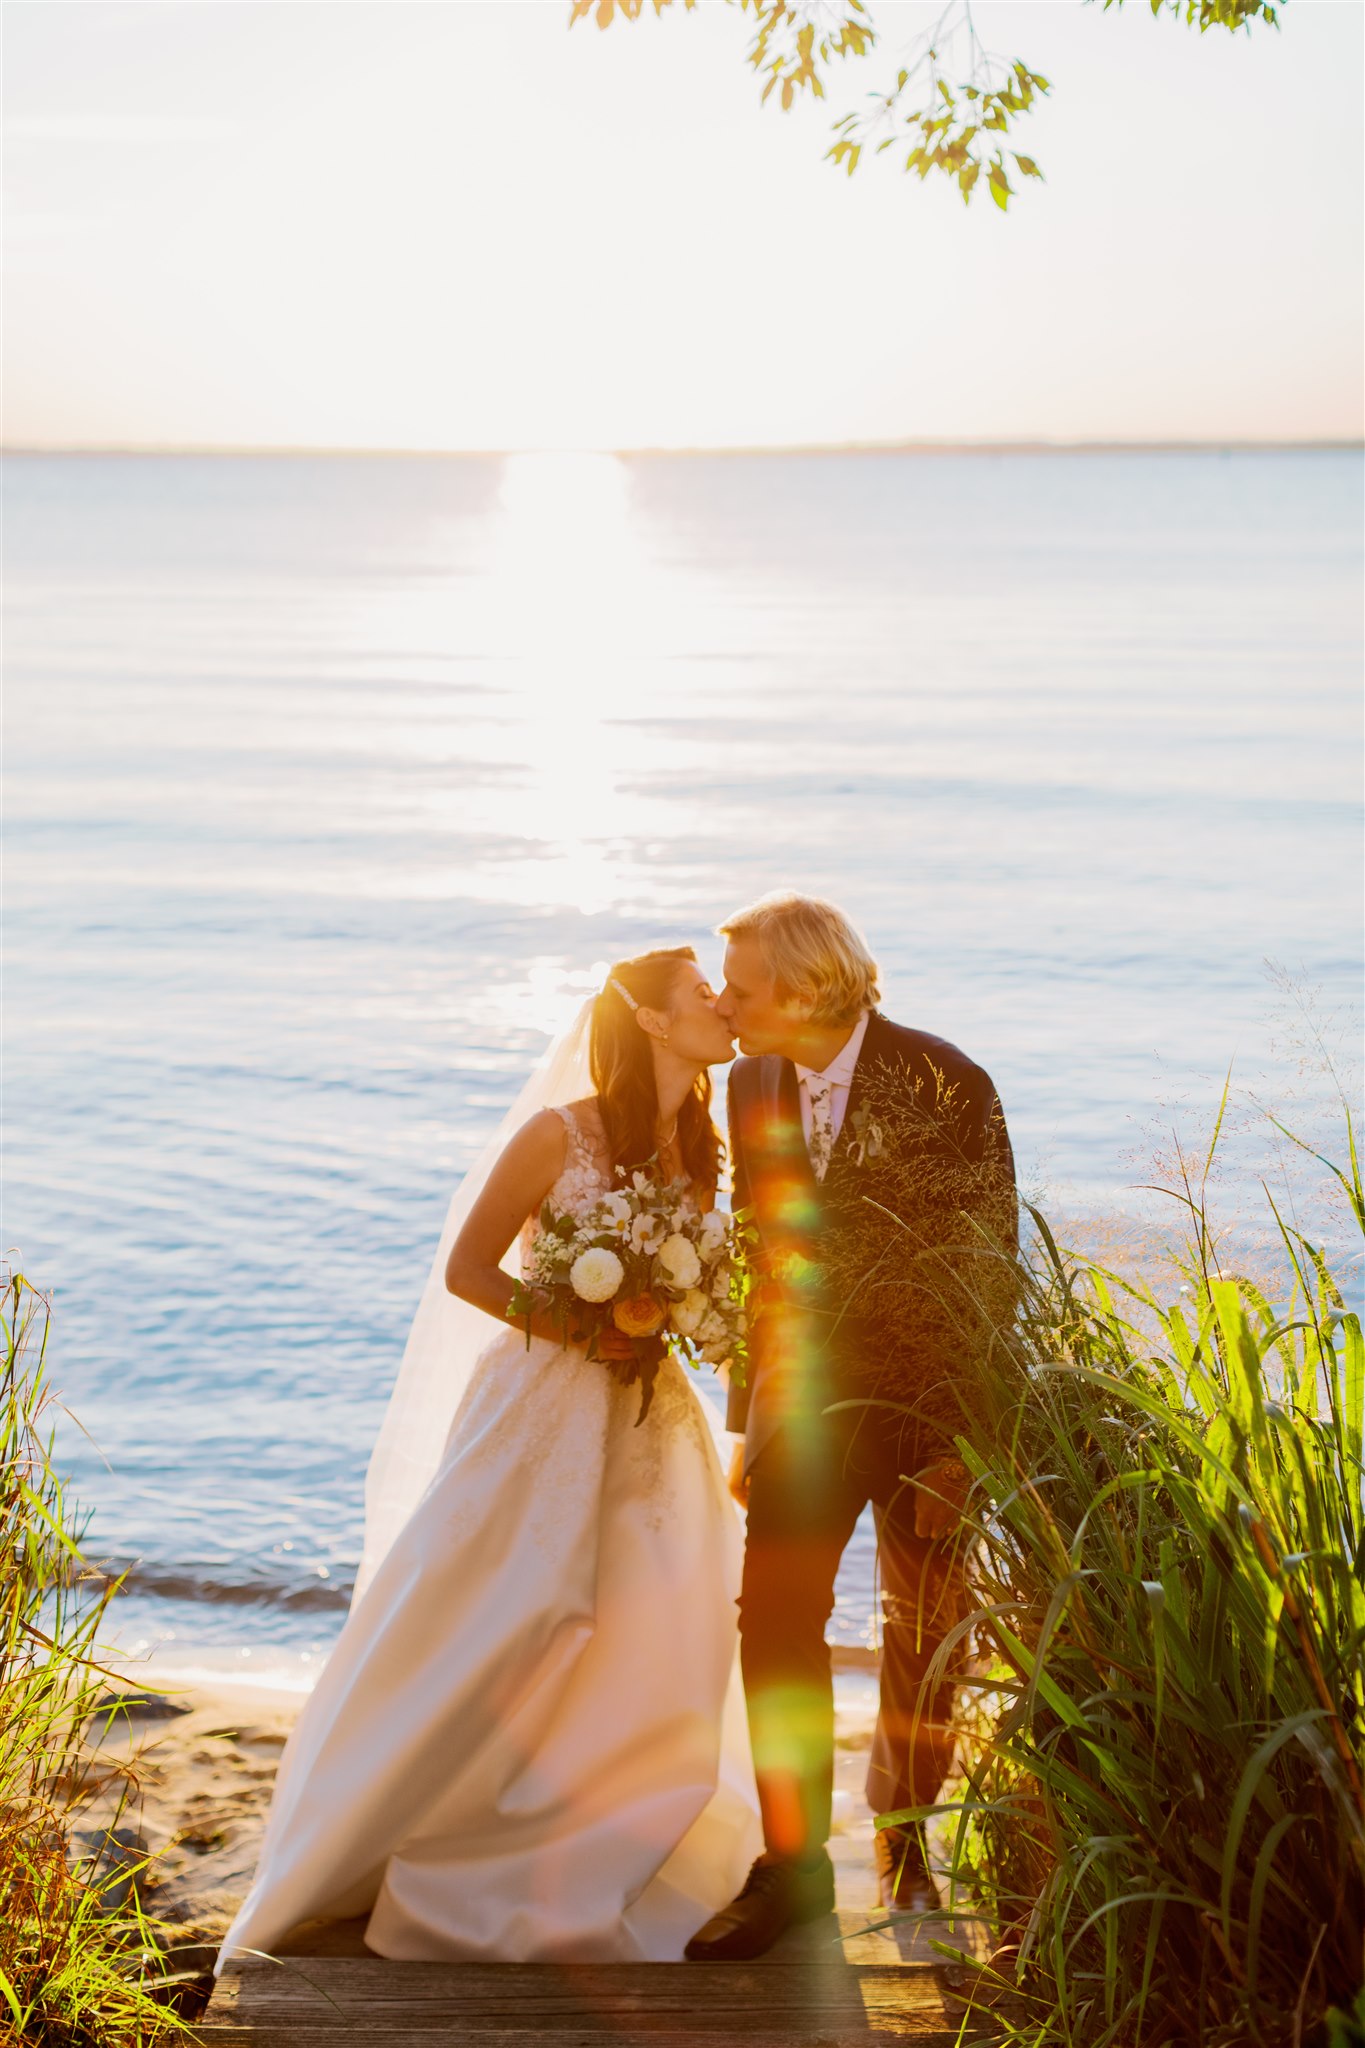 Bride and groom kiss lakeside during golden hour of their Intimate Waterfront Wedding at Chesapeake Bay Beach Club in Kent Island, MD. Image by Victoria Heer, Washington DC wedding photographer.